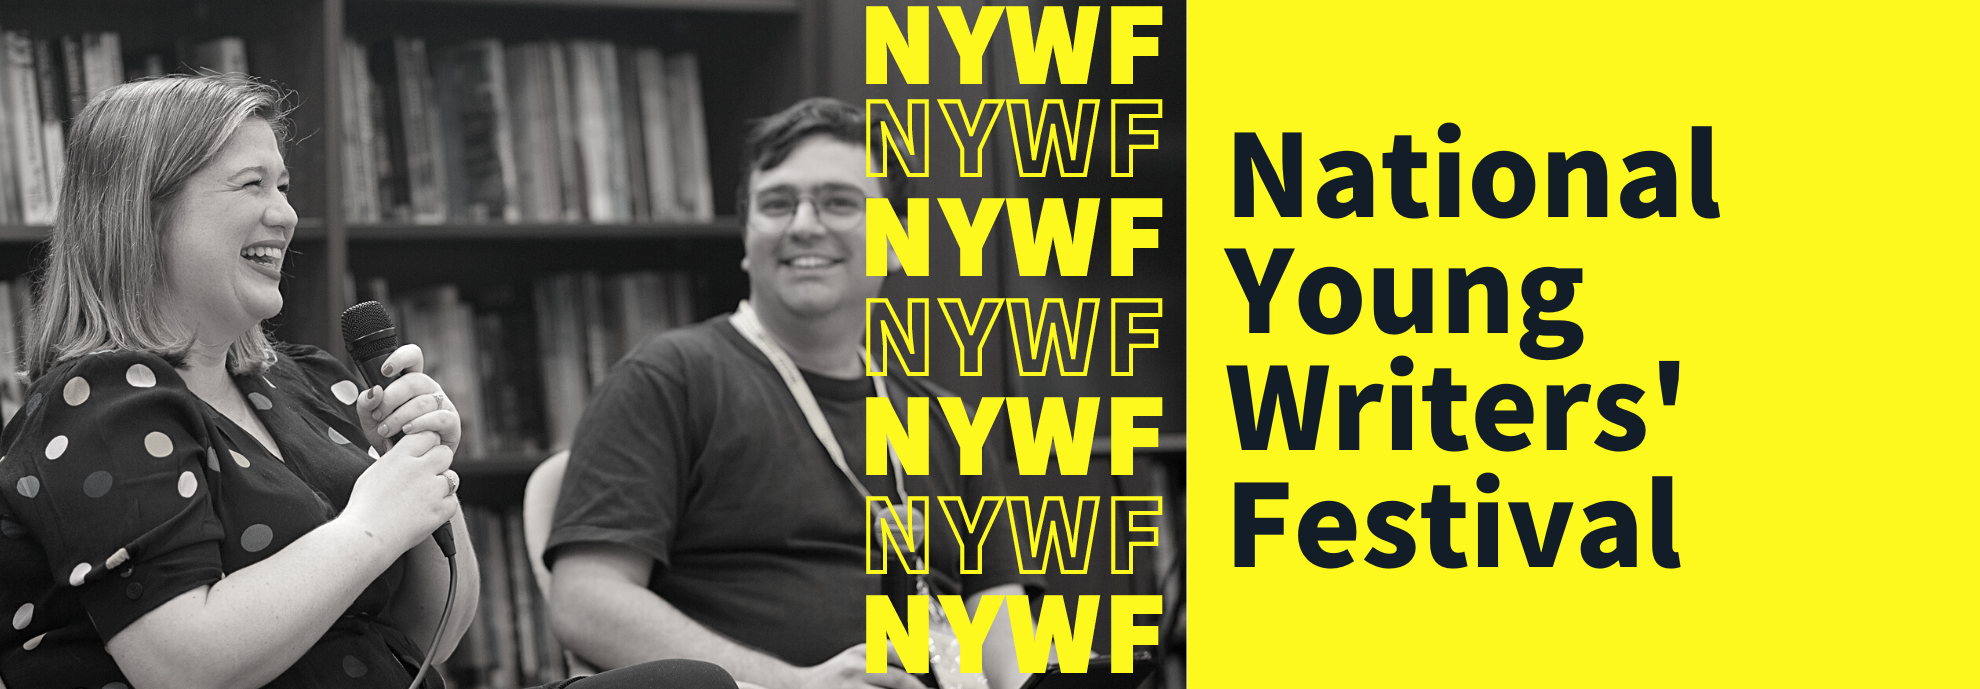 NYWF | Watch our digi events on Demand now!